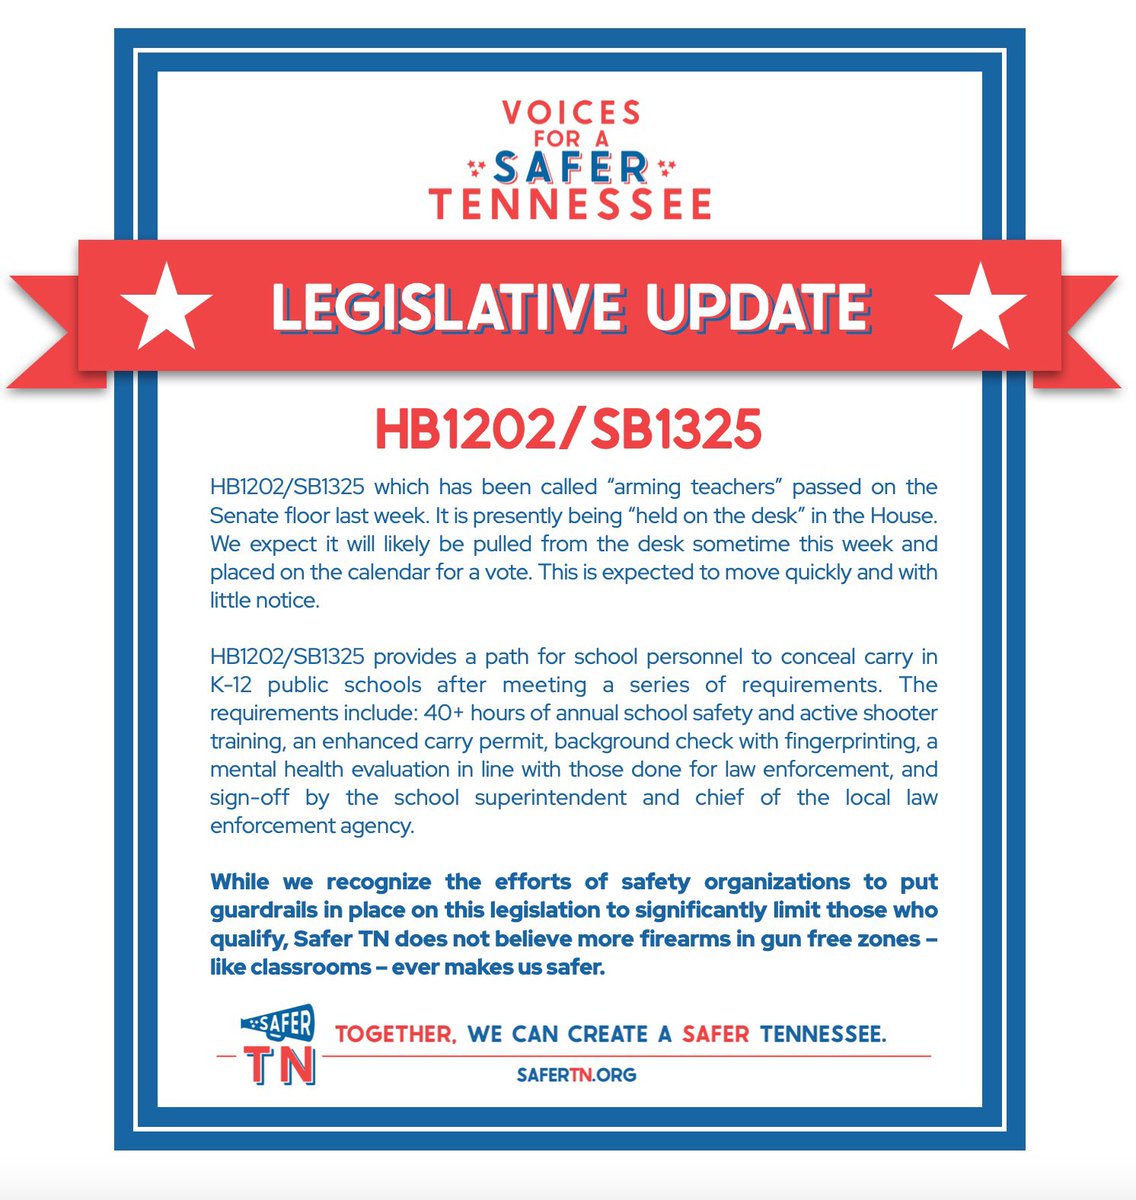 MONDAY, APRIL 15th LEGISLATIVE UPDATE: Because legislative session is winding down, there is lots of activity. Please check out these slides for today’s updates on several of the bills we’re tracking.